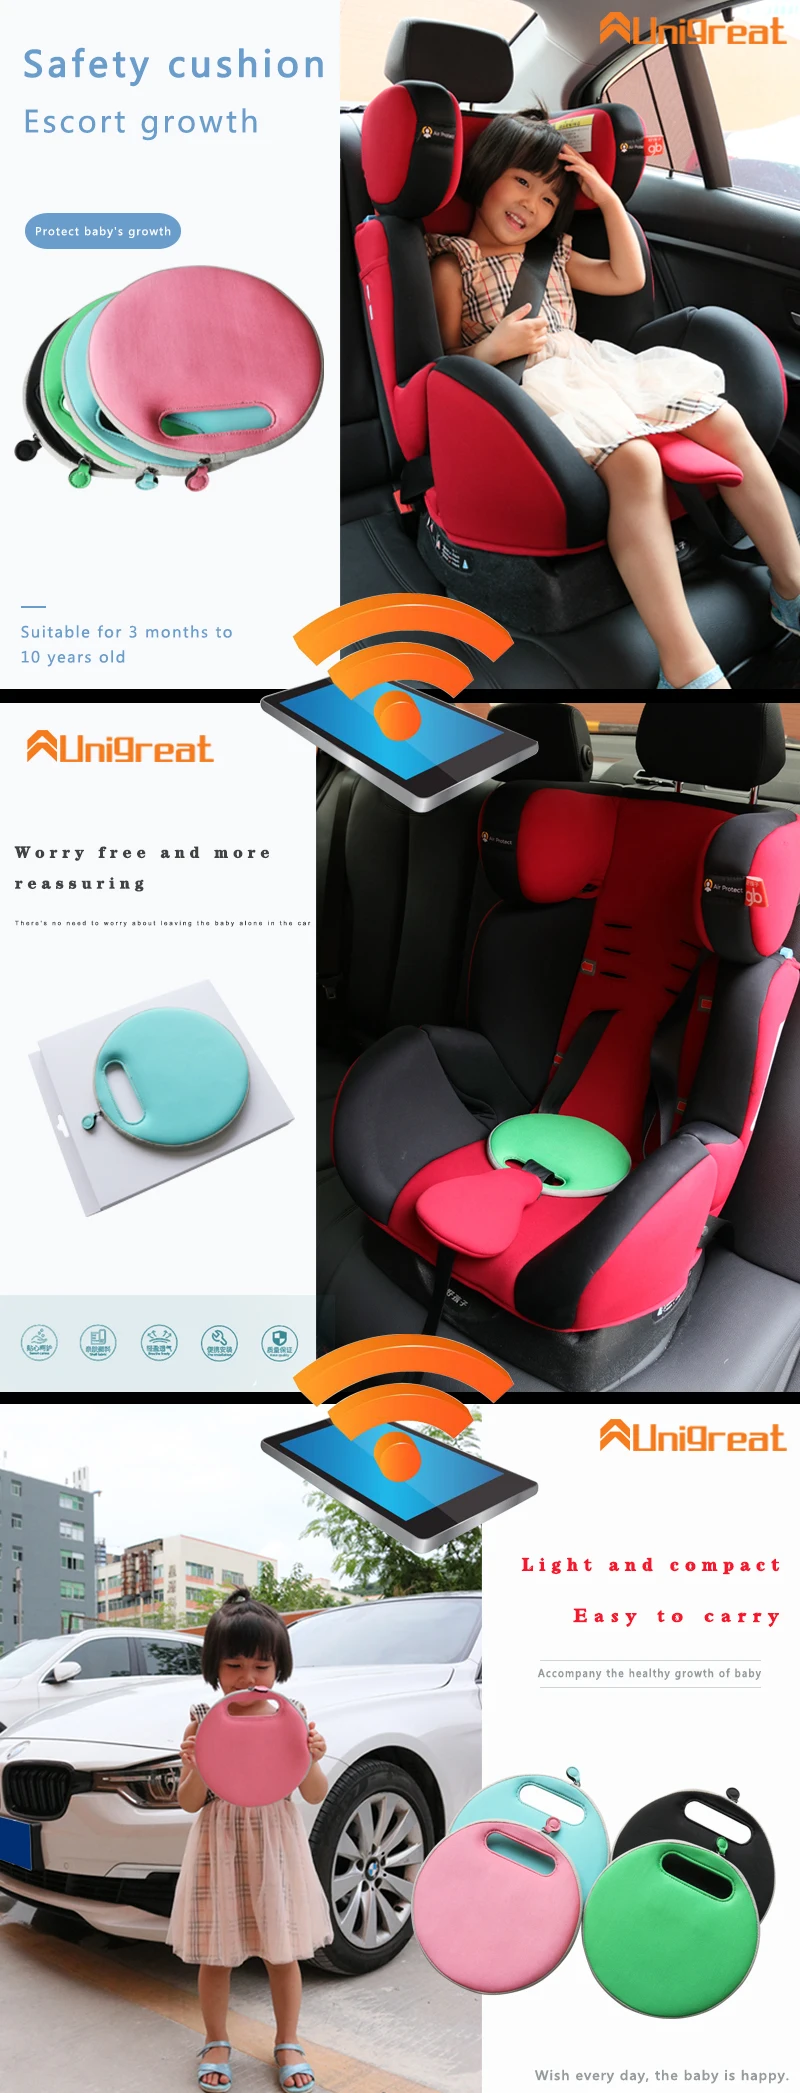 2020 NEW Phone Bluetooth connect free APP kid baby car seat safety seat cushion mat pad reminder weight sensor